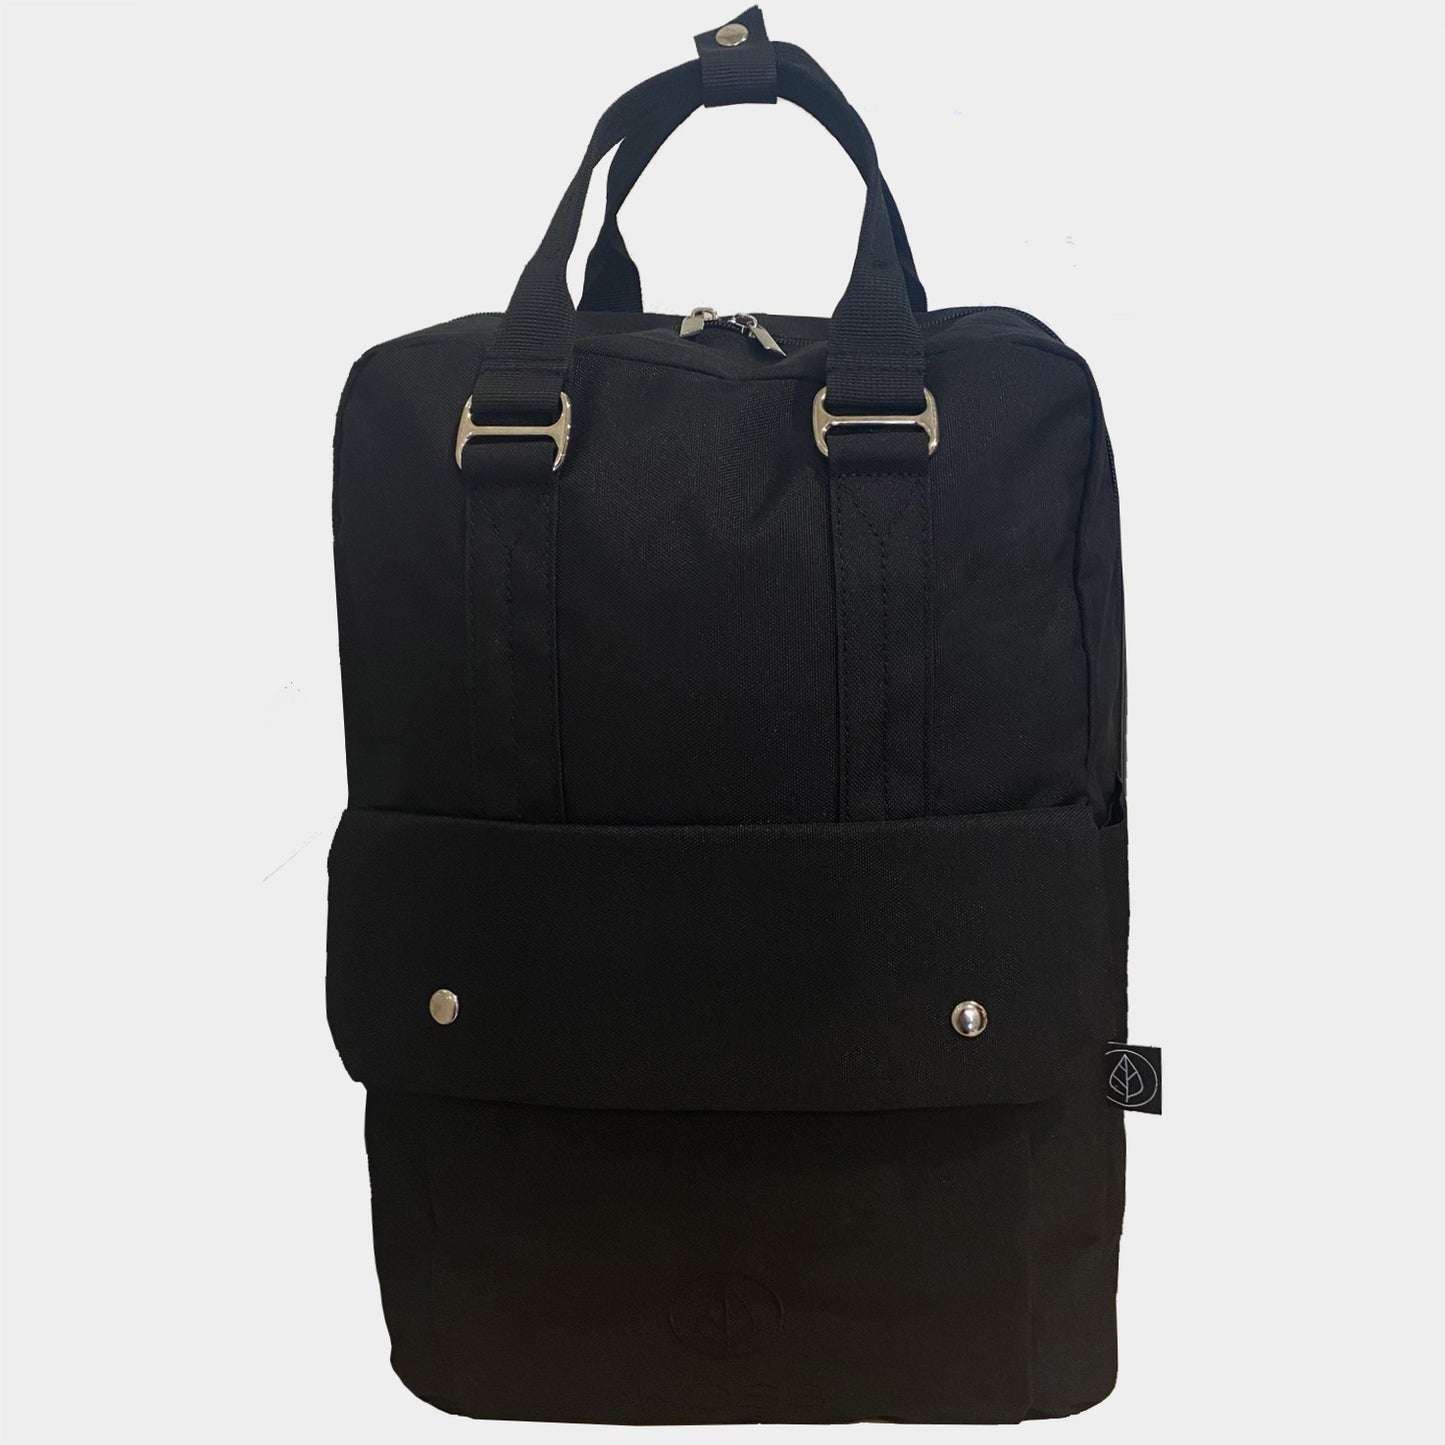 Small urban backpack